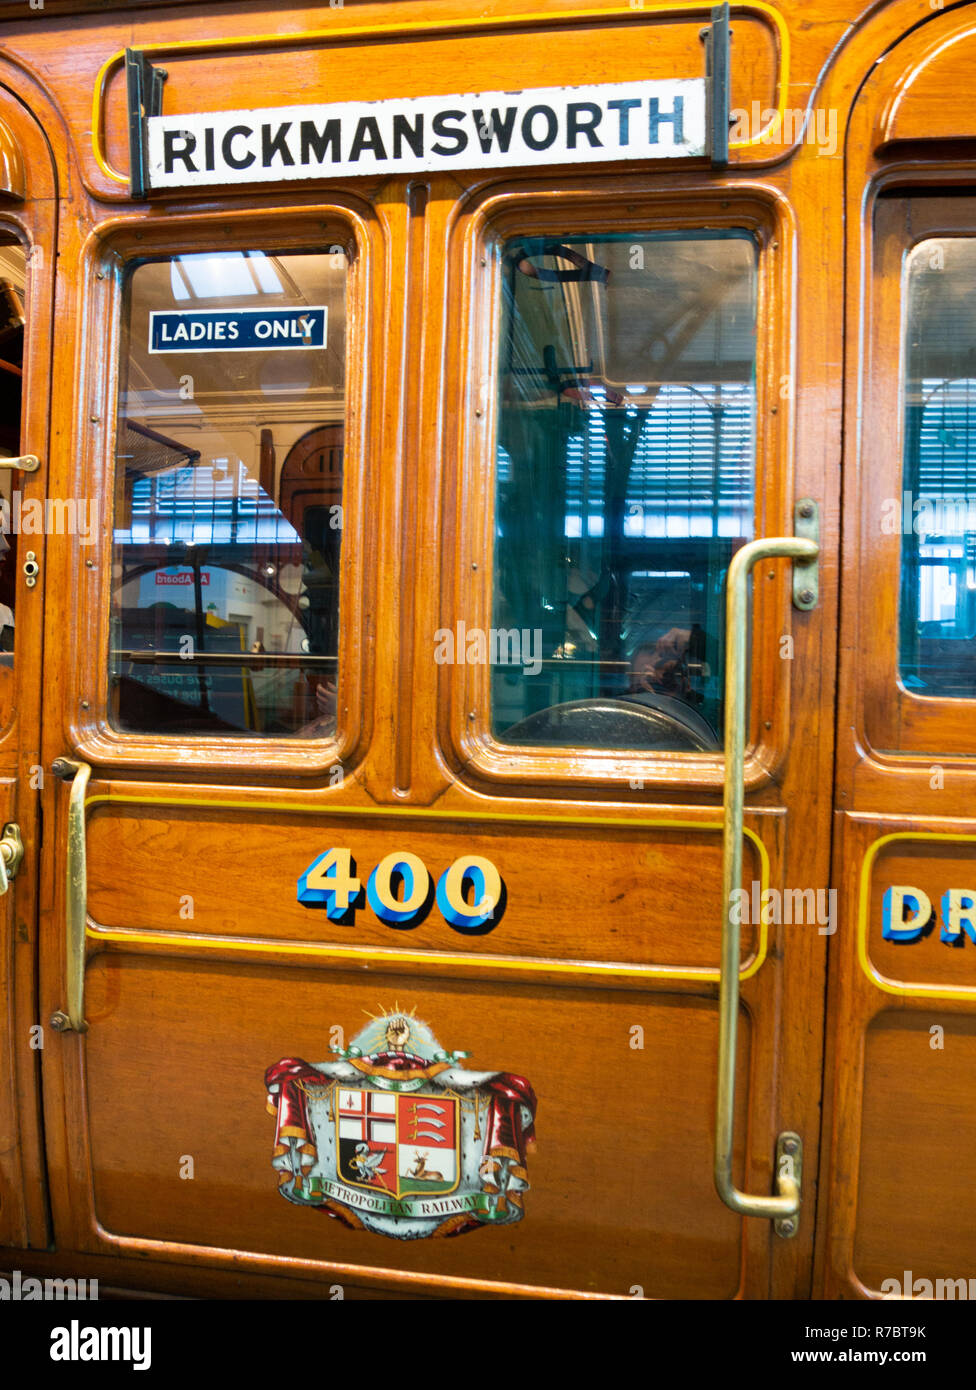 'Ladies Only' sign on a vintage London Underground train carriage for Rickmansworth, London Transport Museum, London, UK Stock Photo